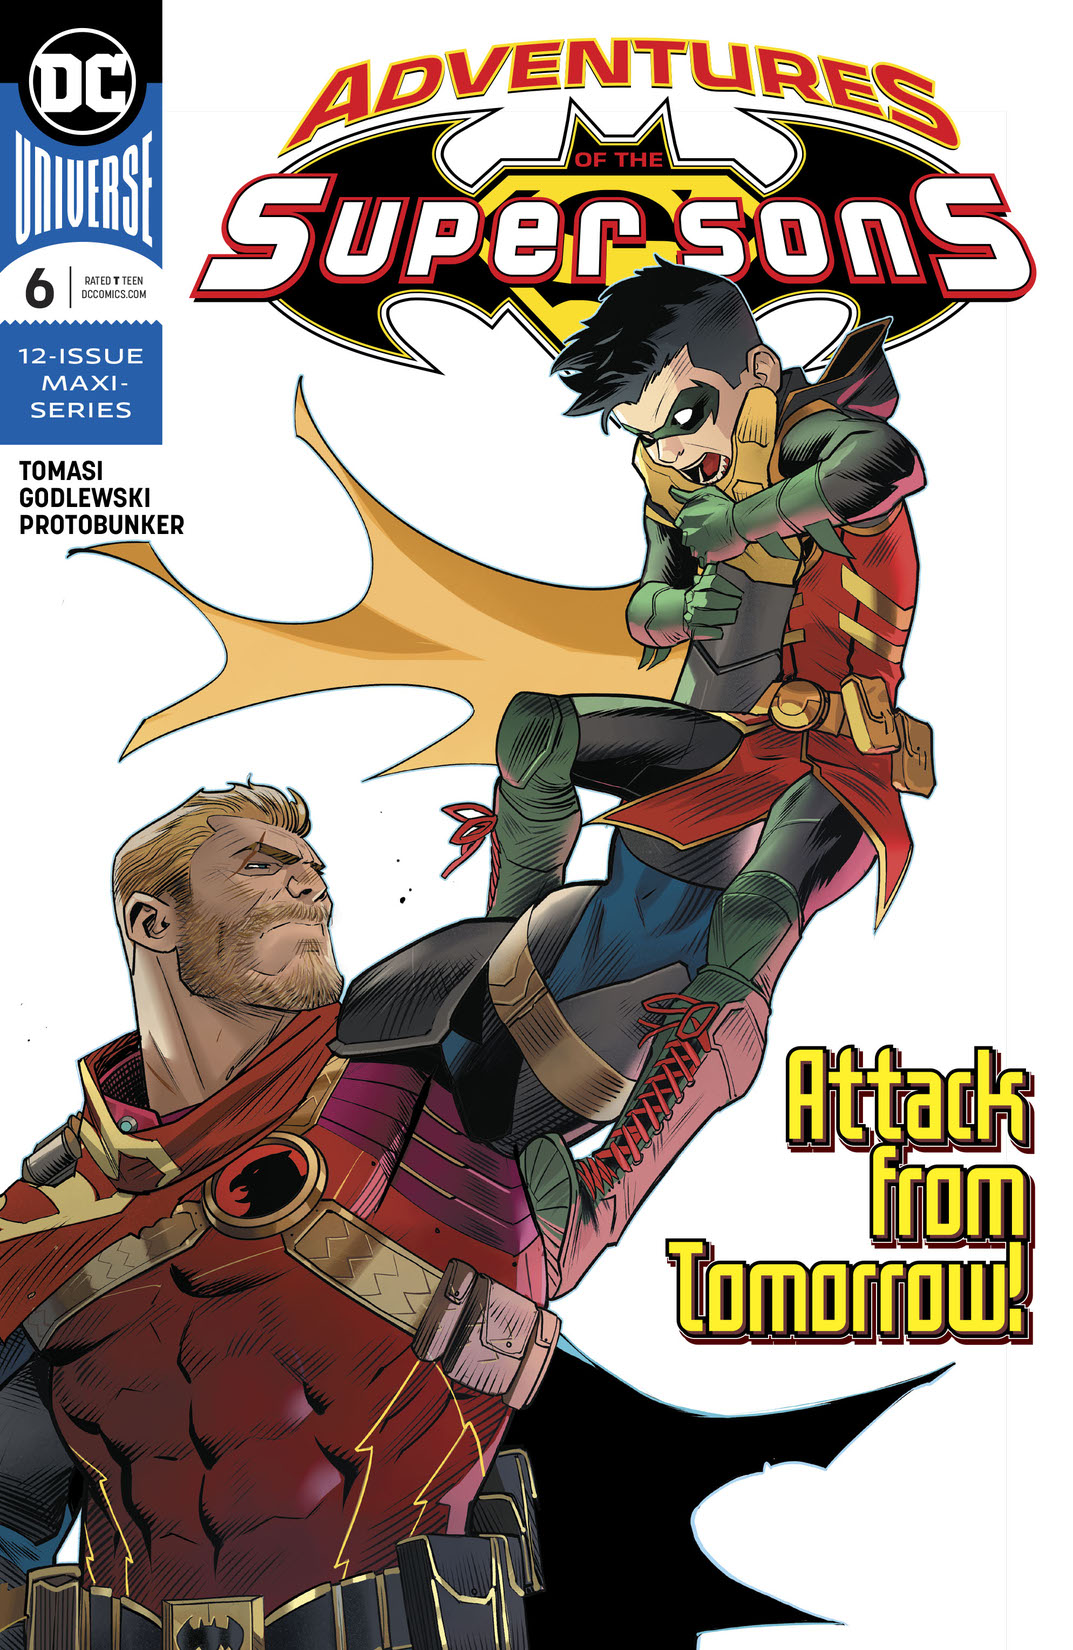 Adventures of the Super Sons #6 preview images